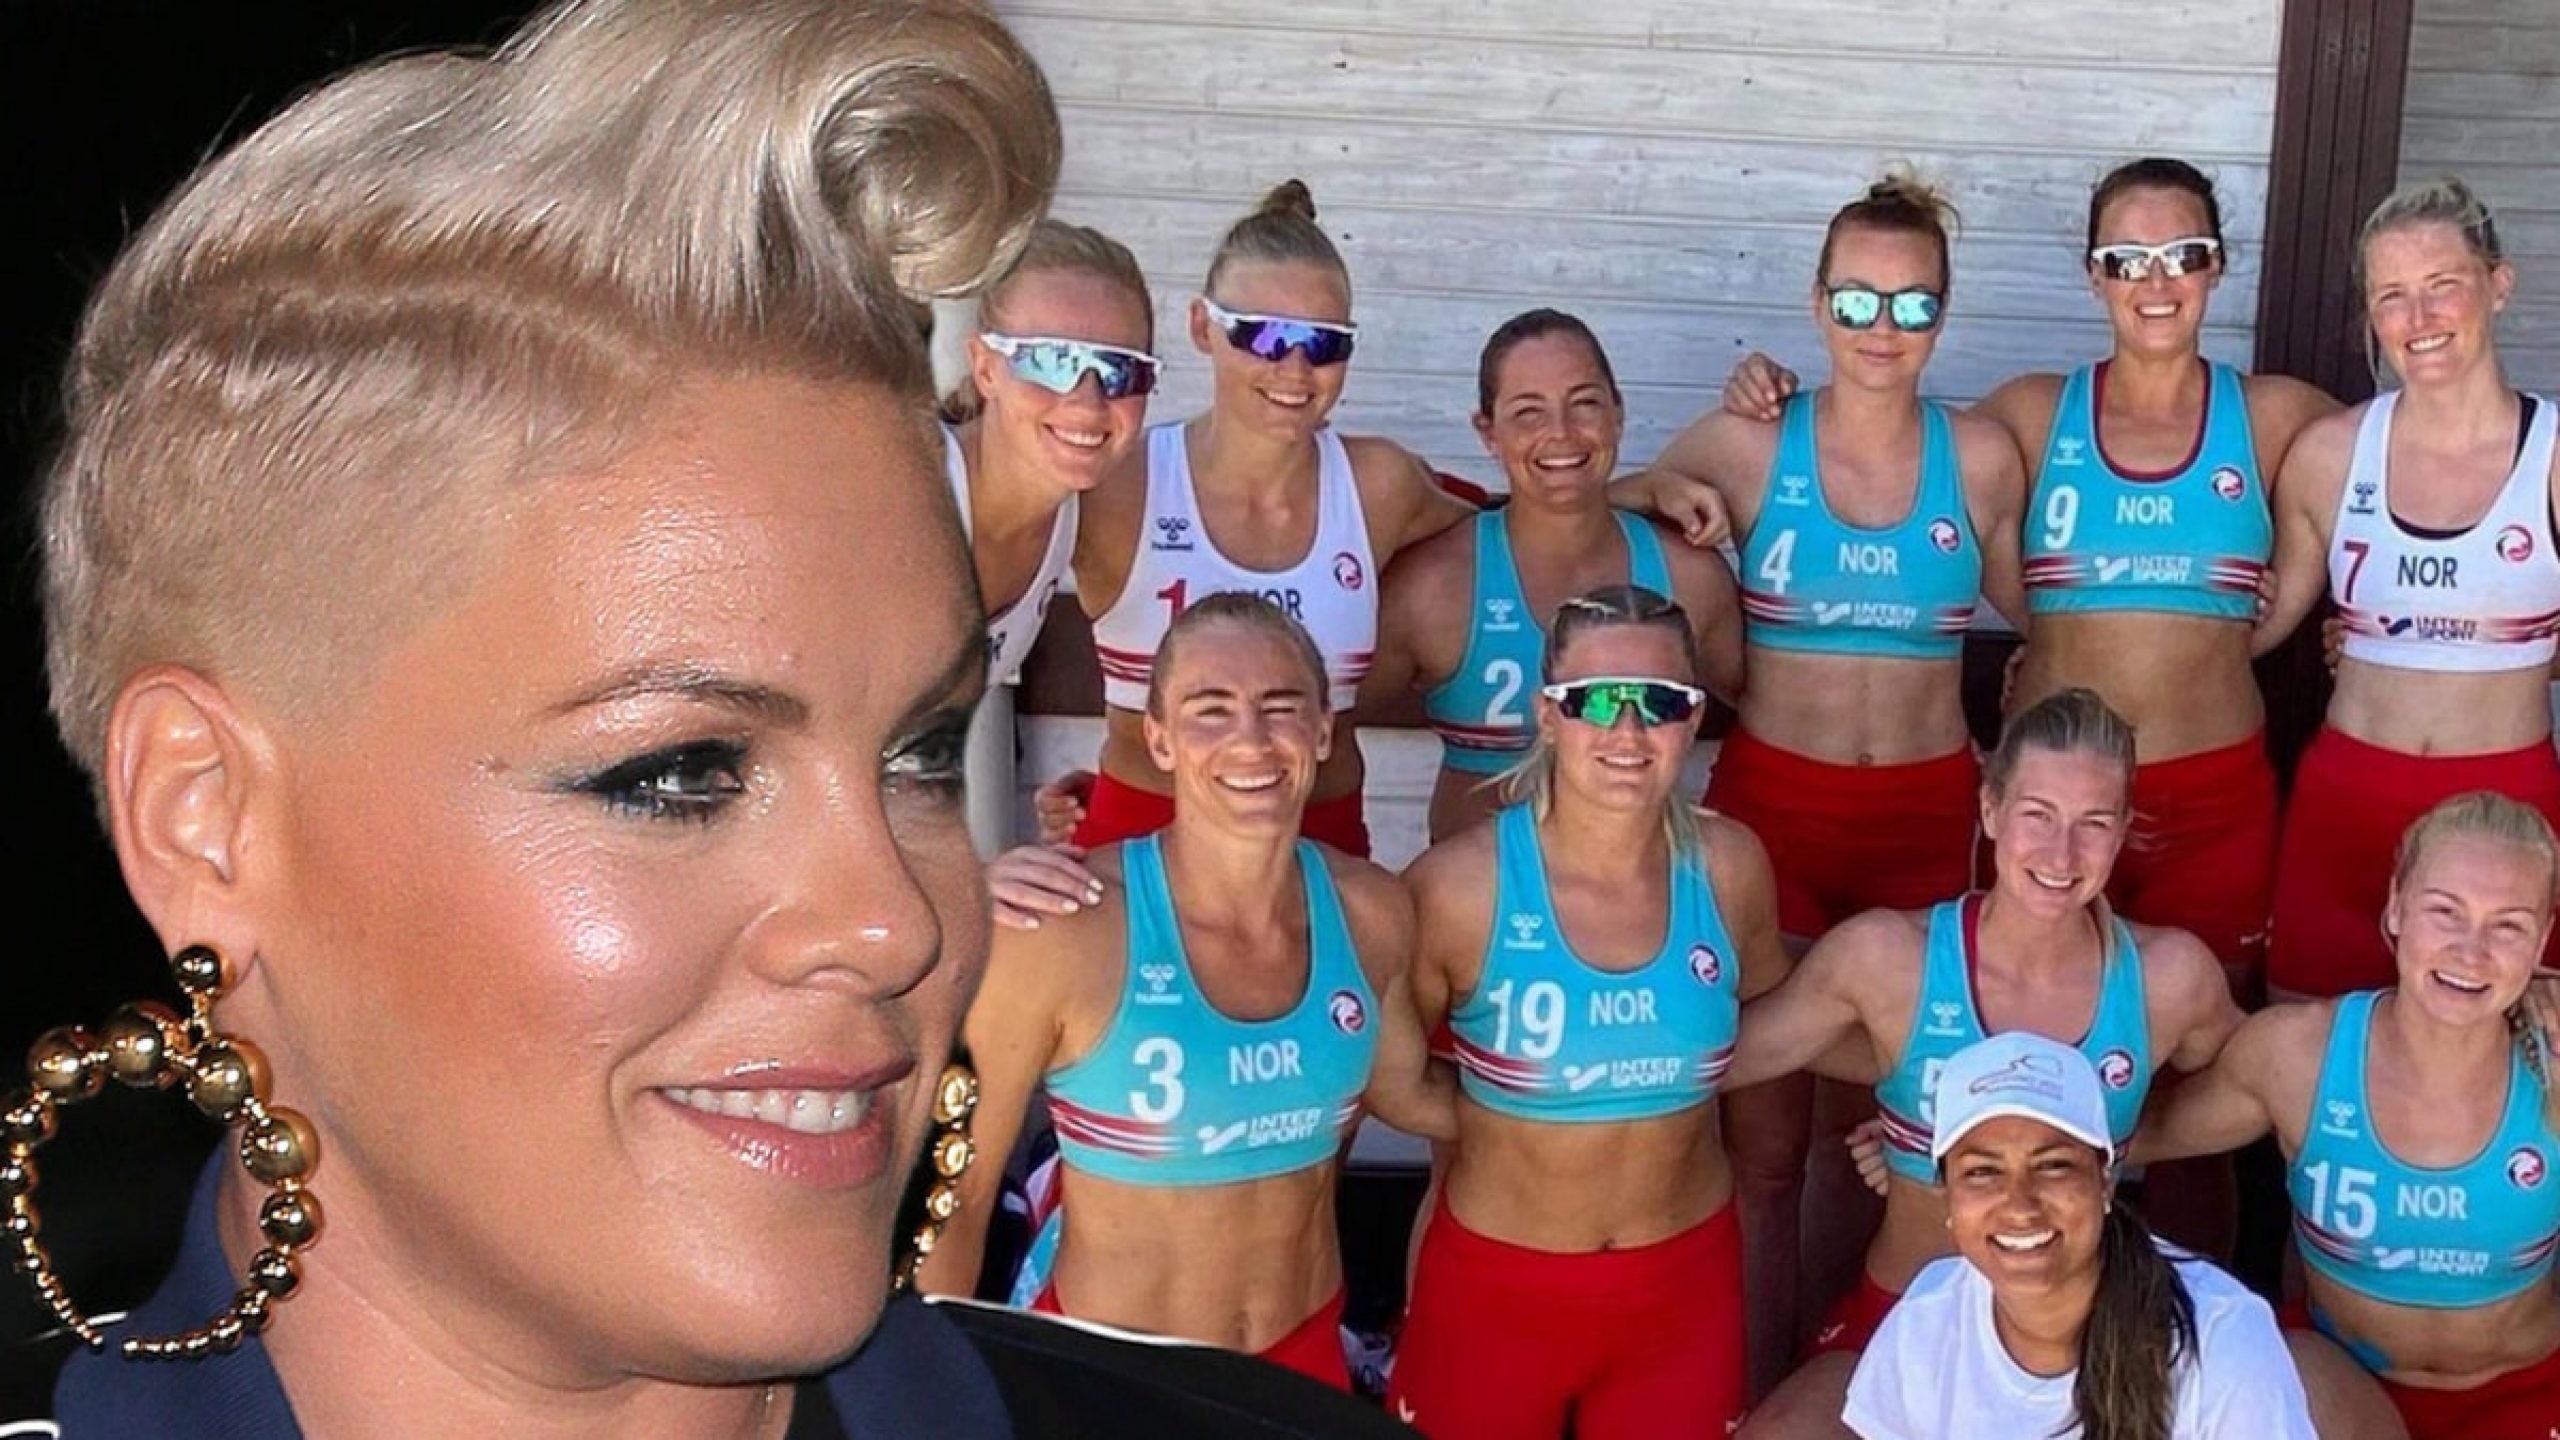 P!nk Says She’ll Pay Norwegian Women’s Handball Fines Over ‘Sexist Rules’